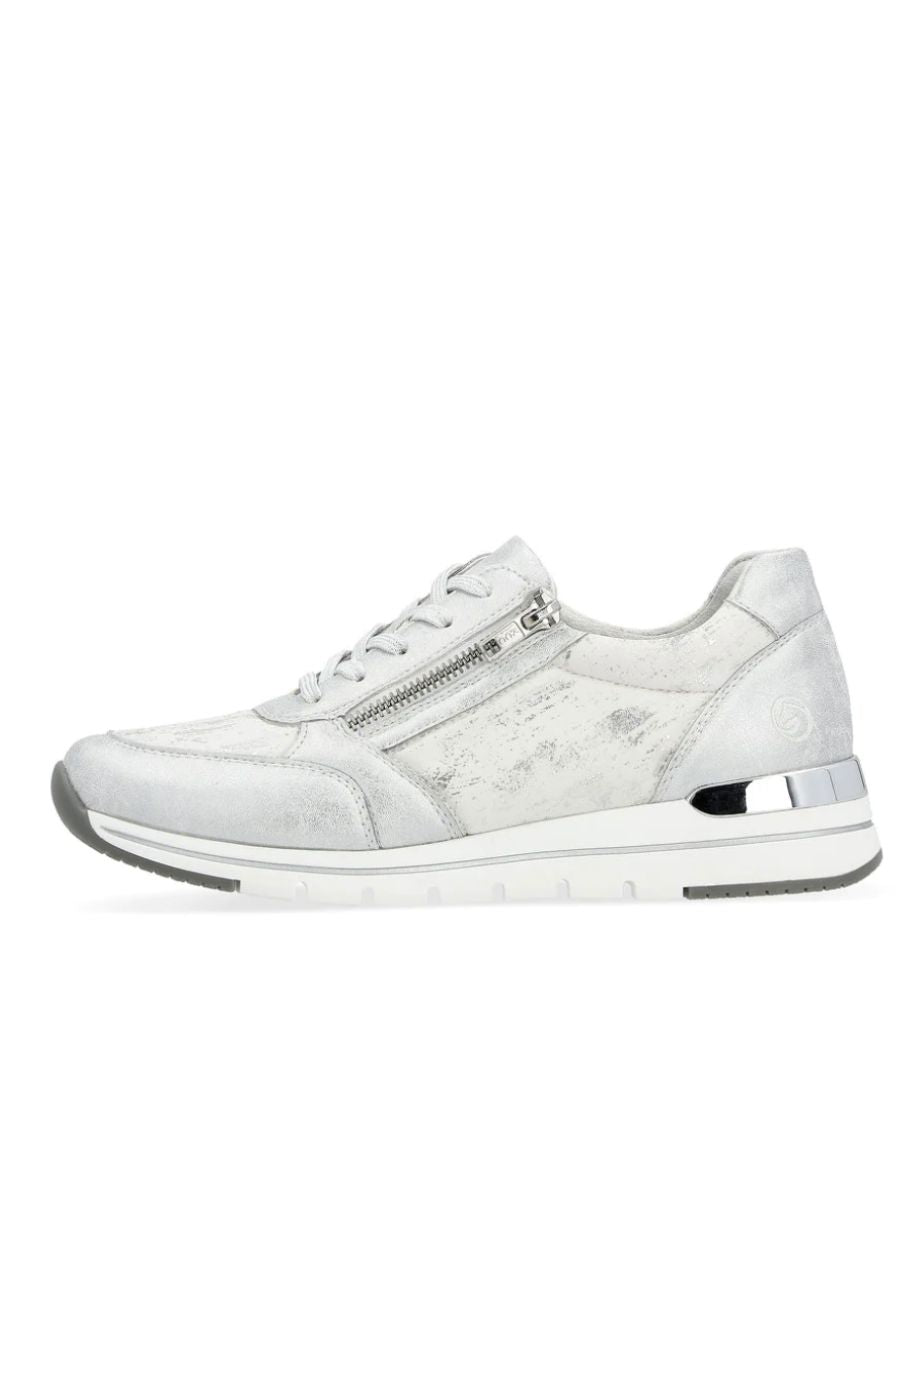 Remonte Wedged Trainer in Silver